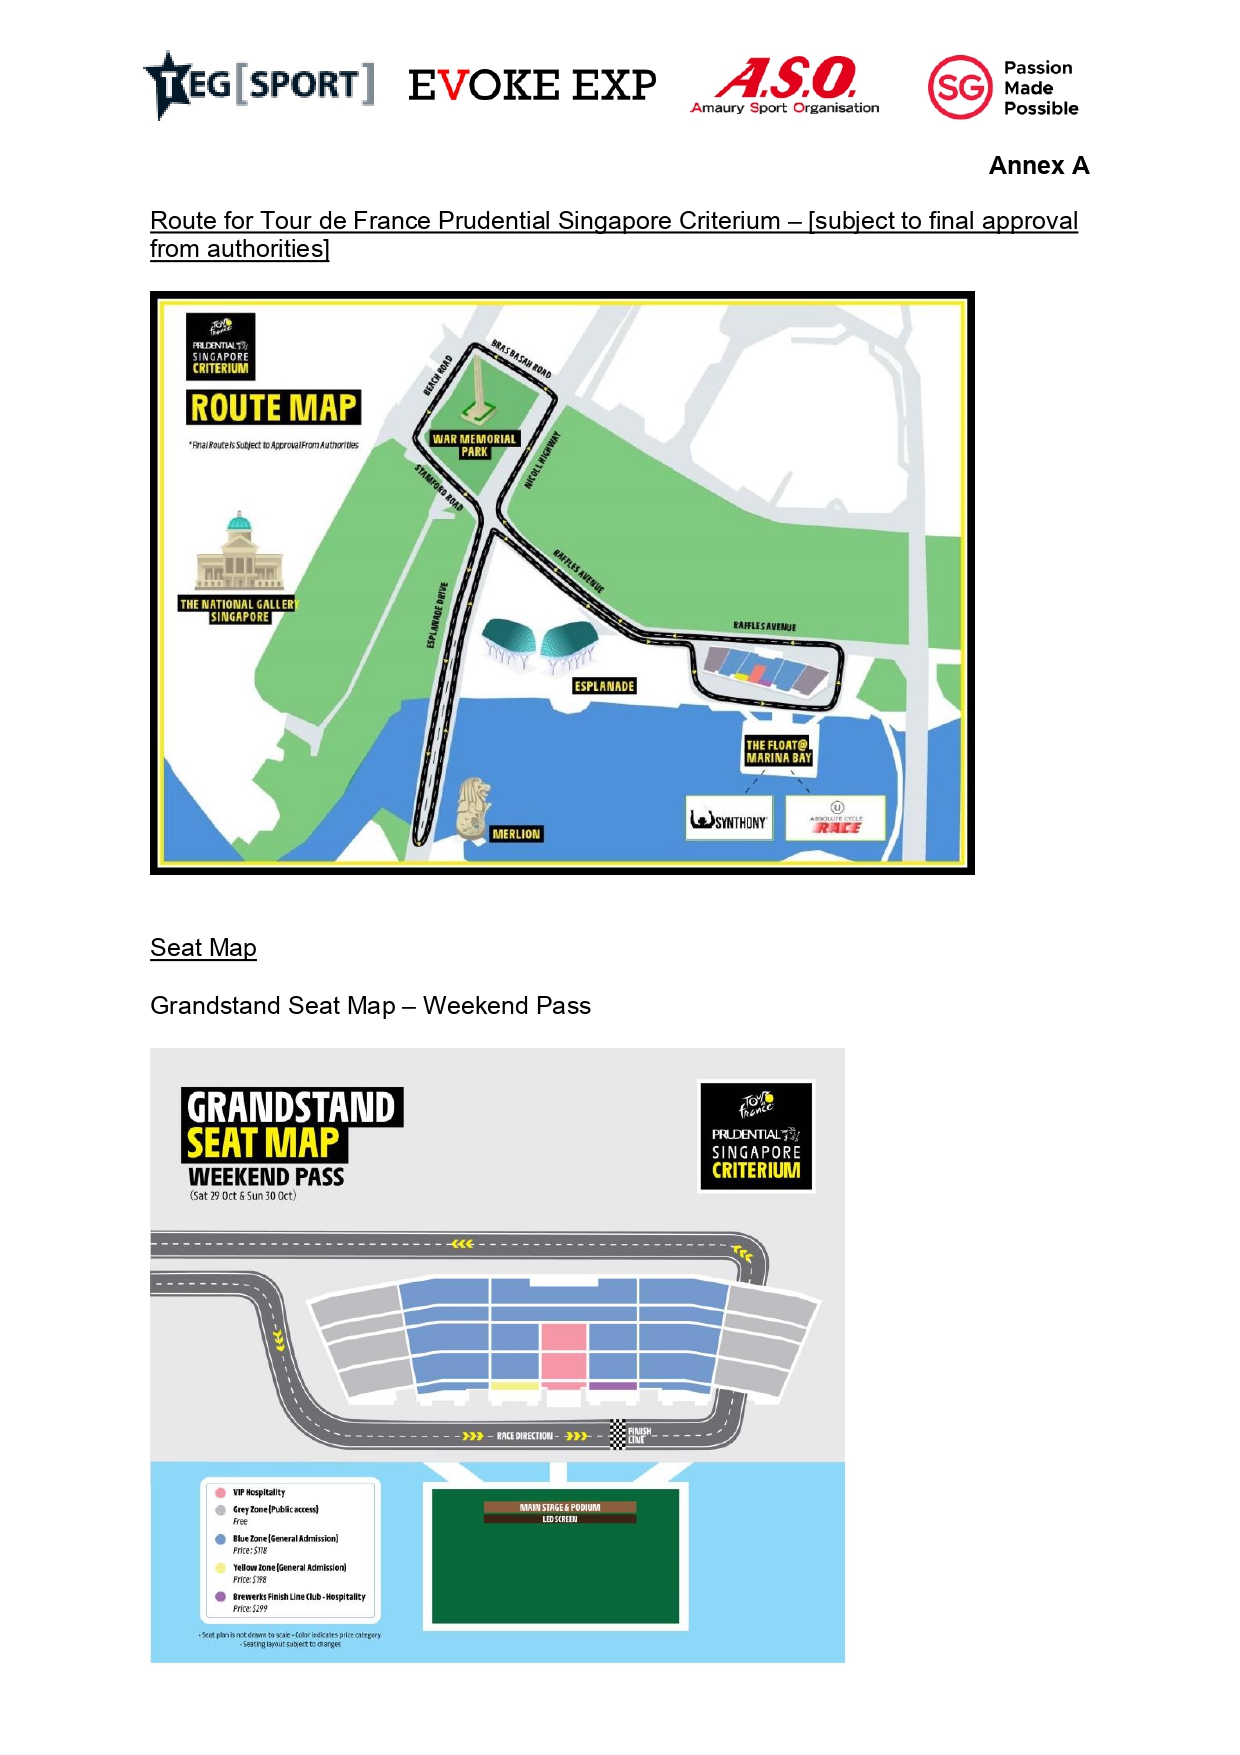 Press Release_ROUTE FOR TOUR DE FRANCE PRUDENTIAL SIN-GAPORE CRITERIUM FINALISED_ ALL INVITED TO CELEBRATE THE ARRIVAL OF TOUR DE FRANCE IN SINGAPORE FROM 29-30 OCTOBER_page-0004